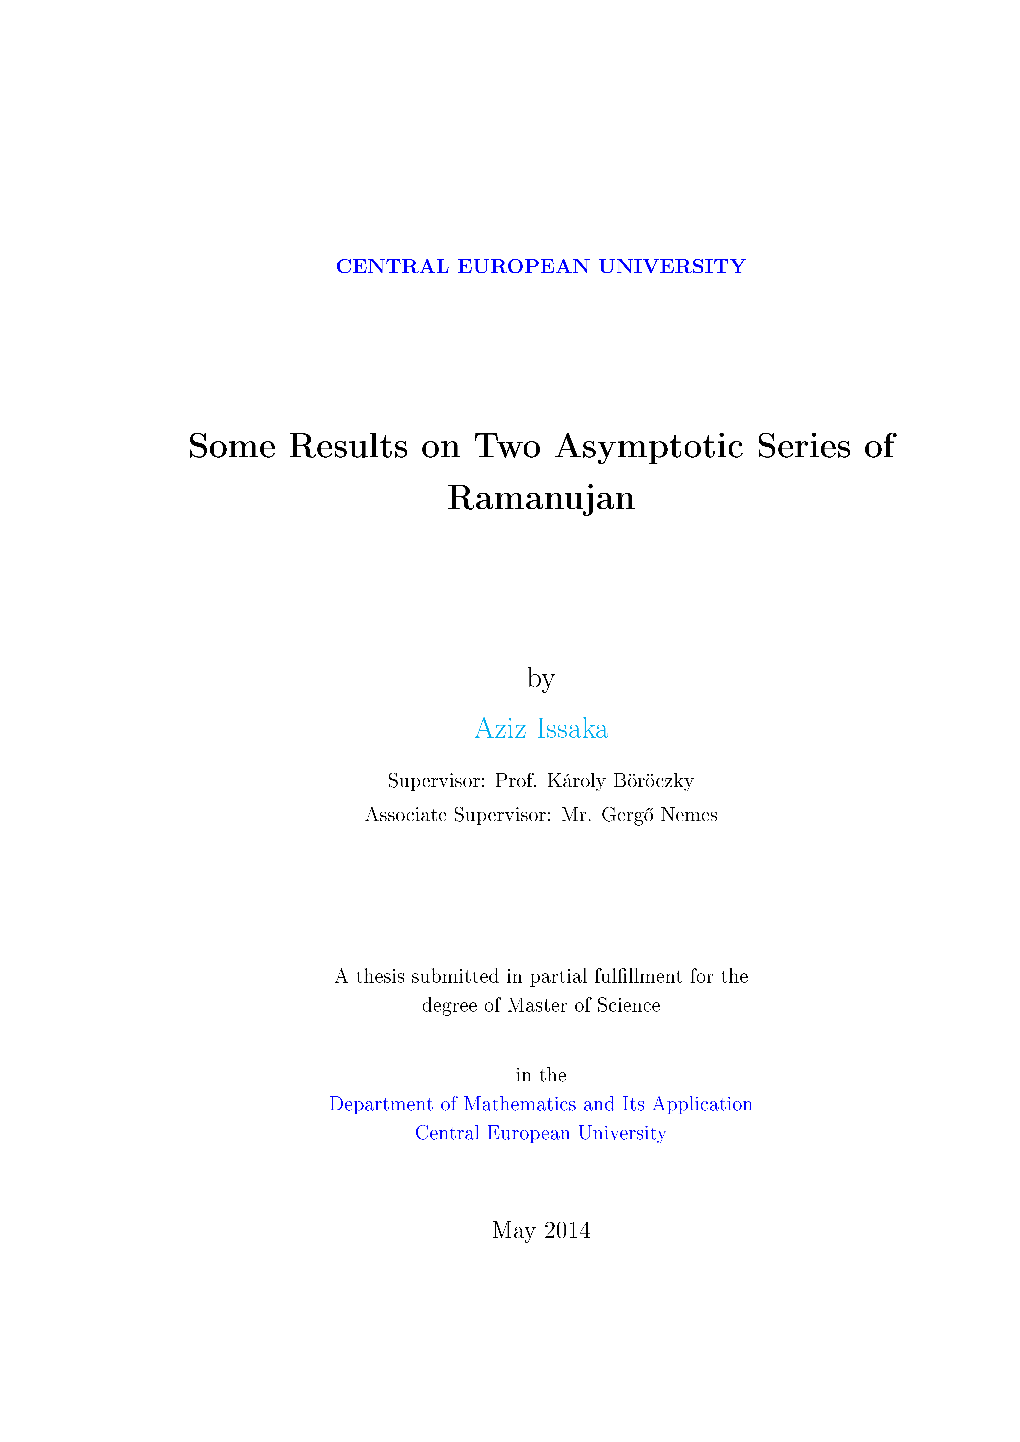 Some Results on Two Asymptotic Series of Ramanujan